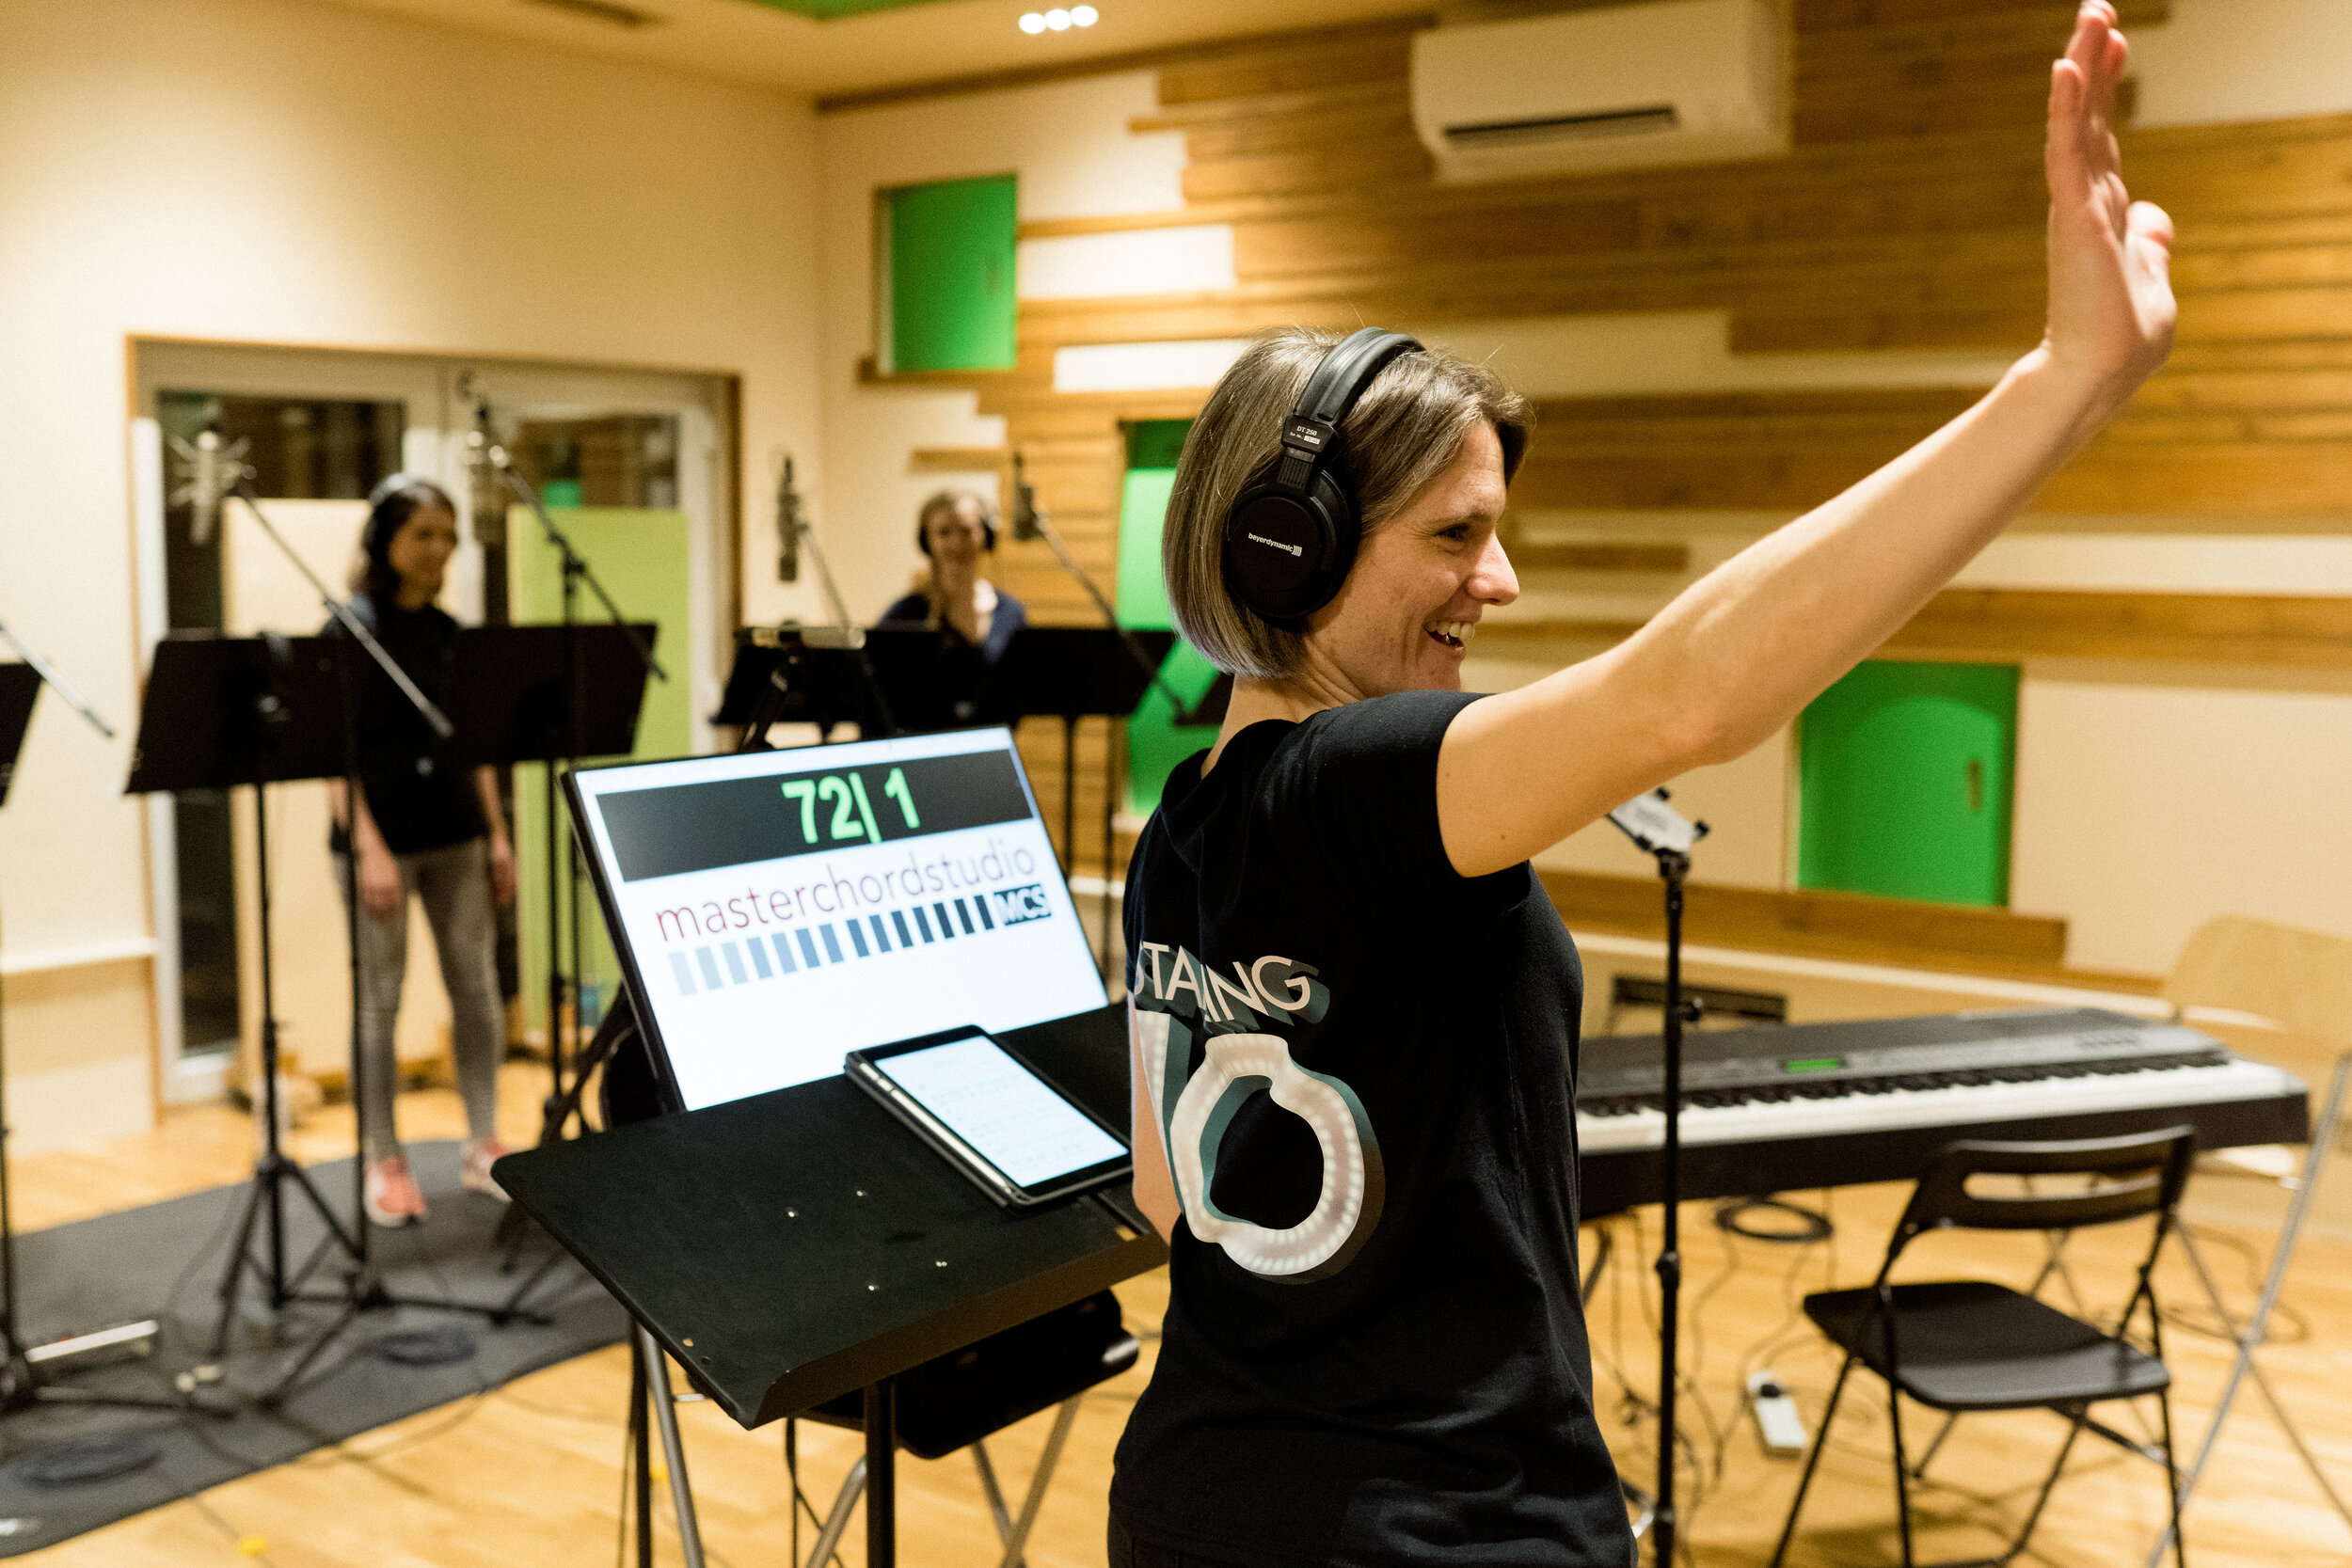 Expert singing leaders guide choirs in professional recording studio Photo by Florence Fox 